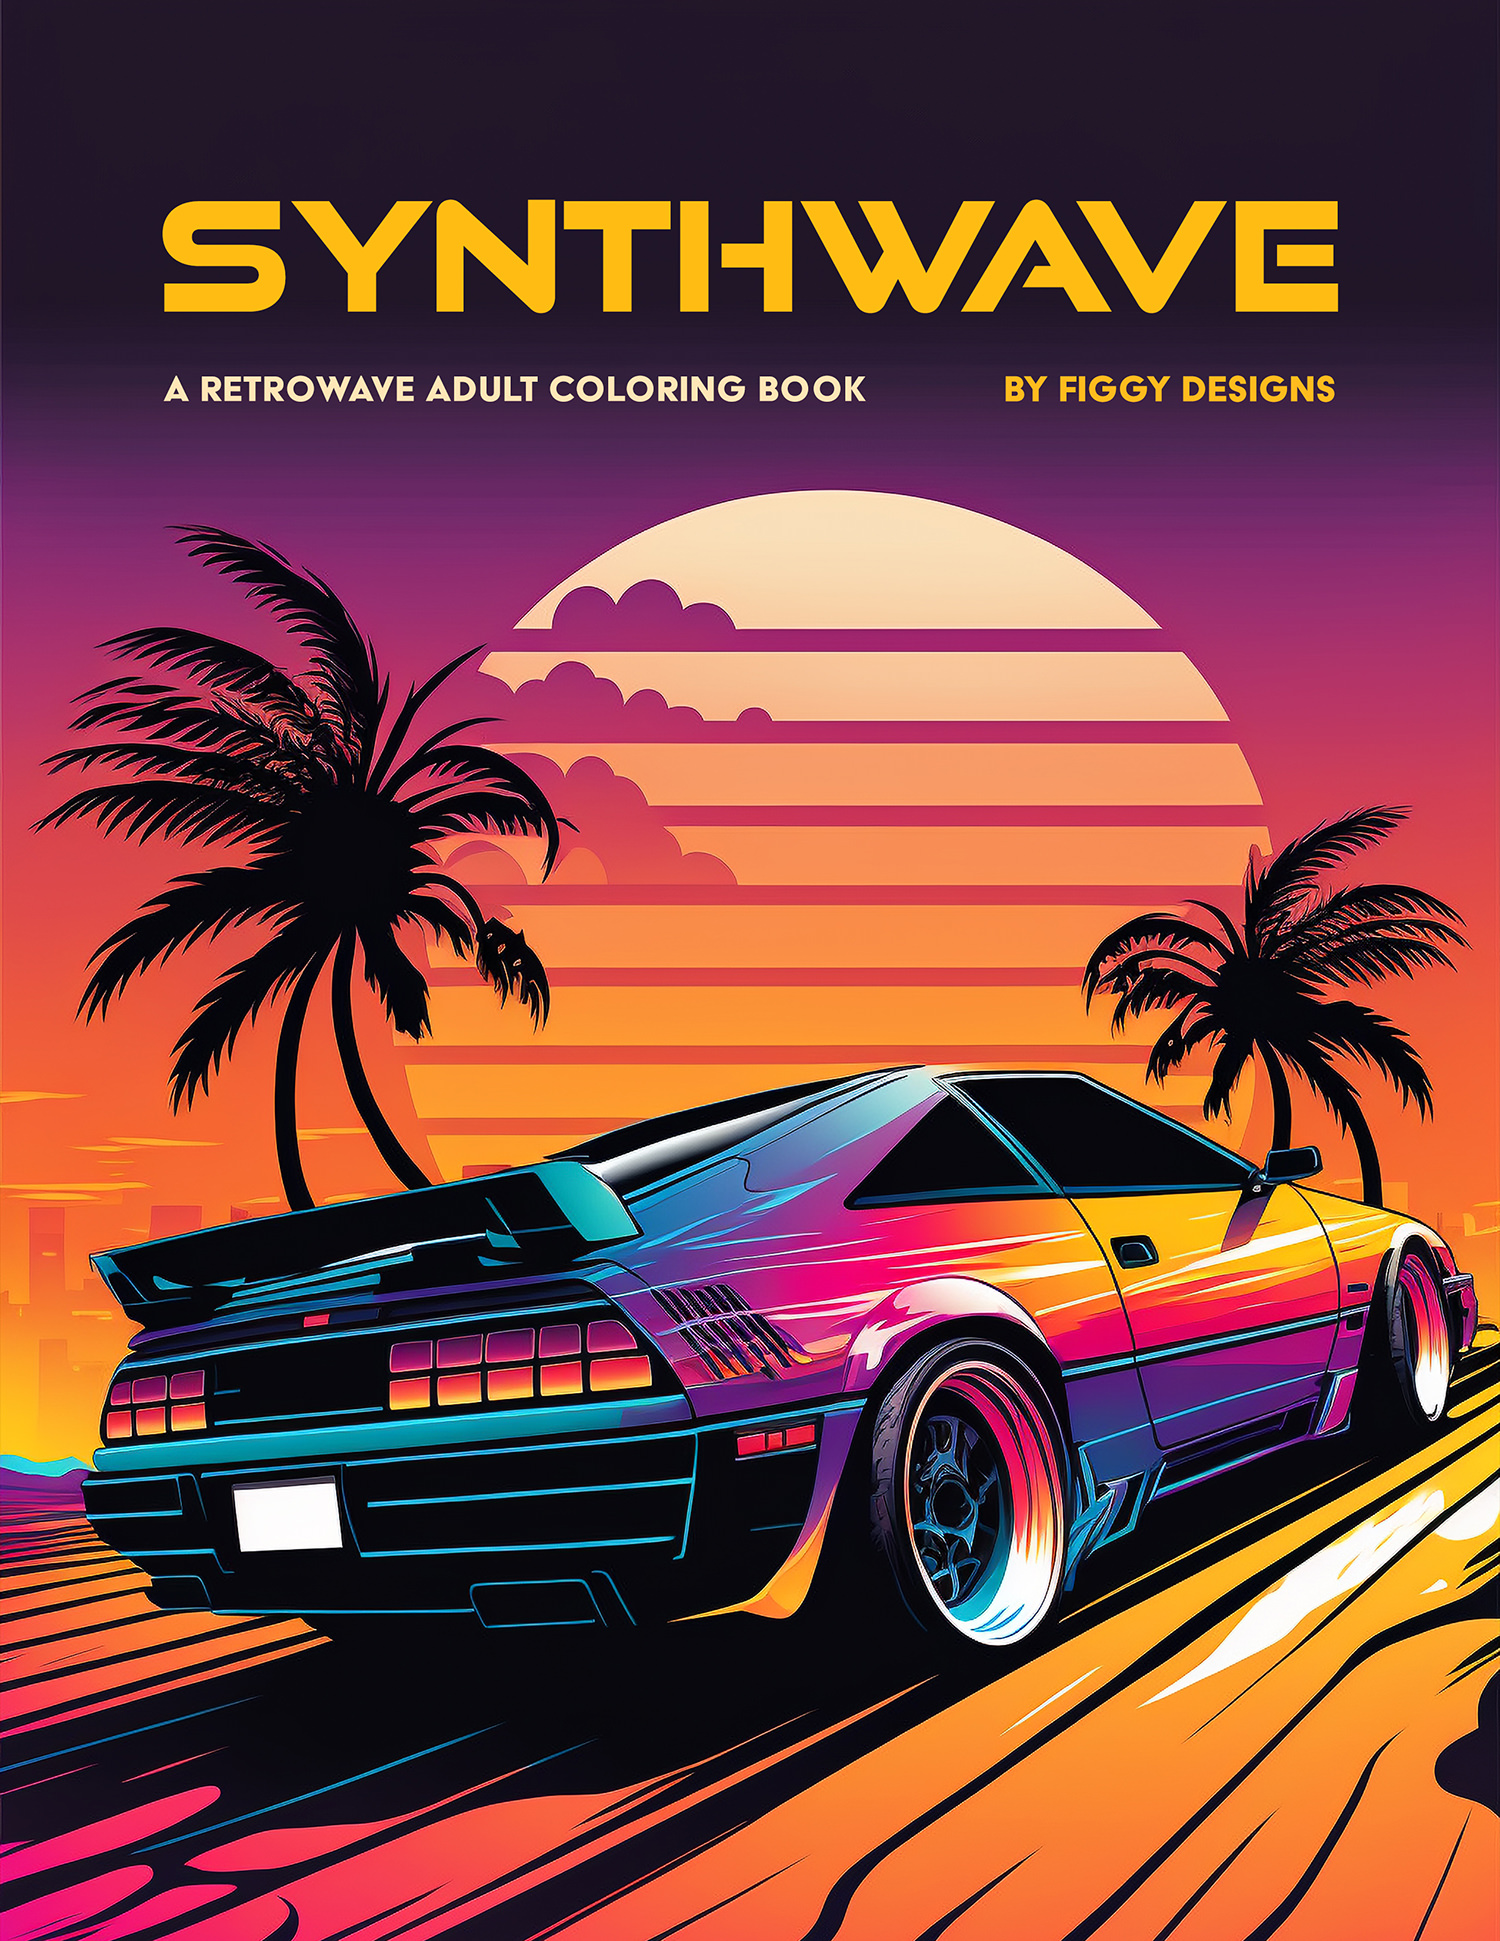 Synthwave: A Retrowave Adult Coloring Book